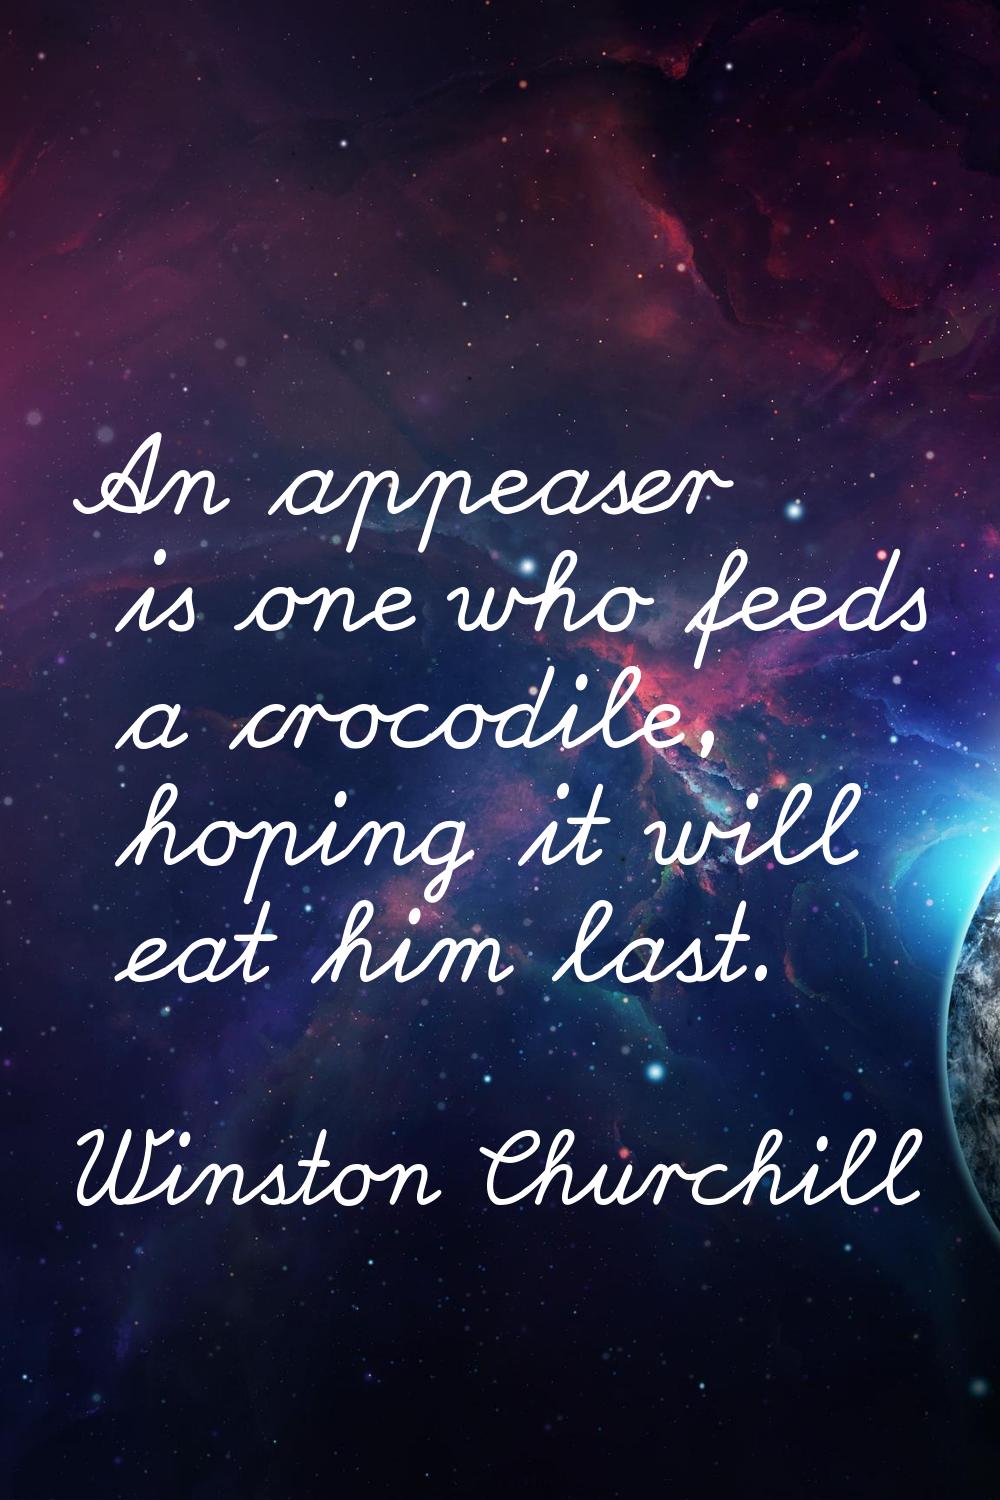 An appeaser is one who feeds a crocodile, hoping it will eat him last.